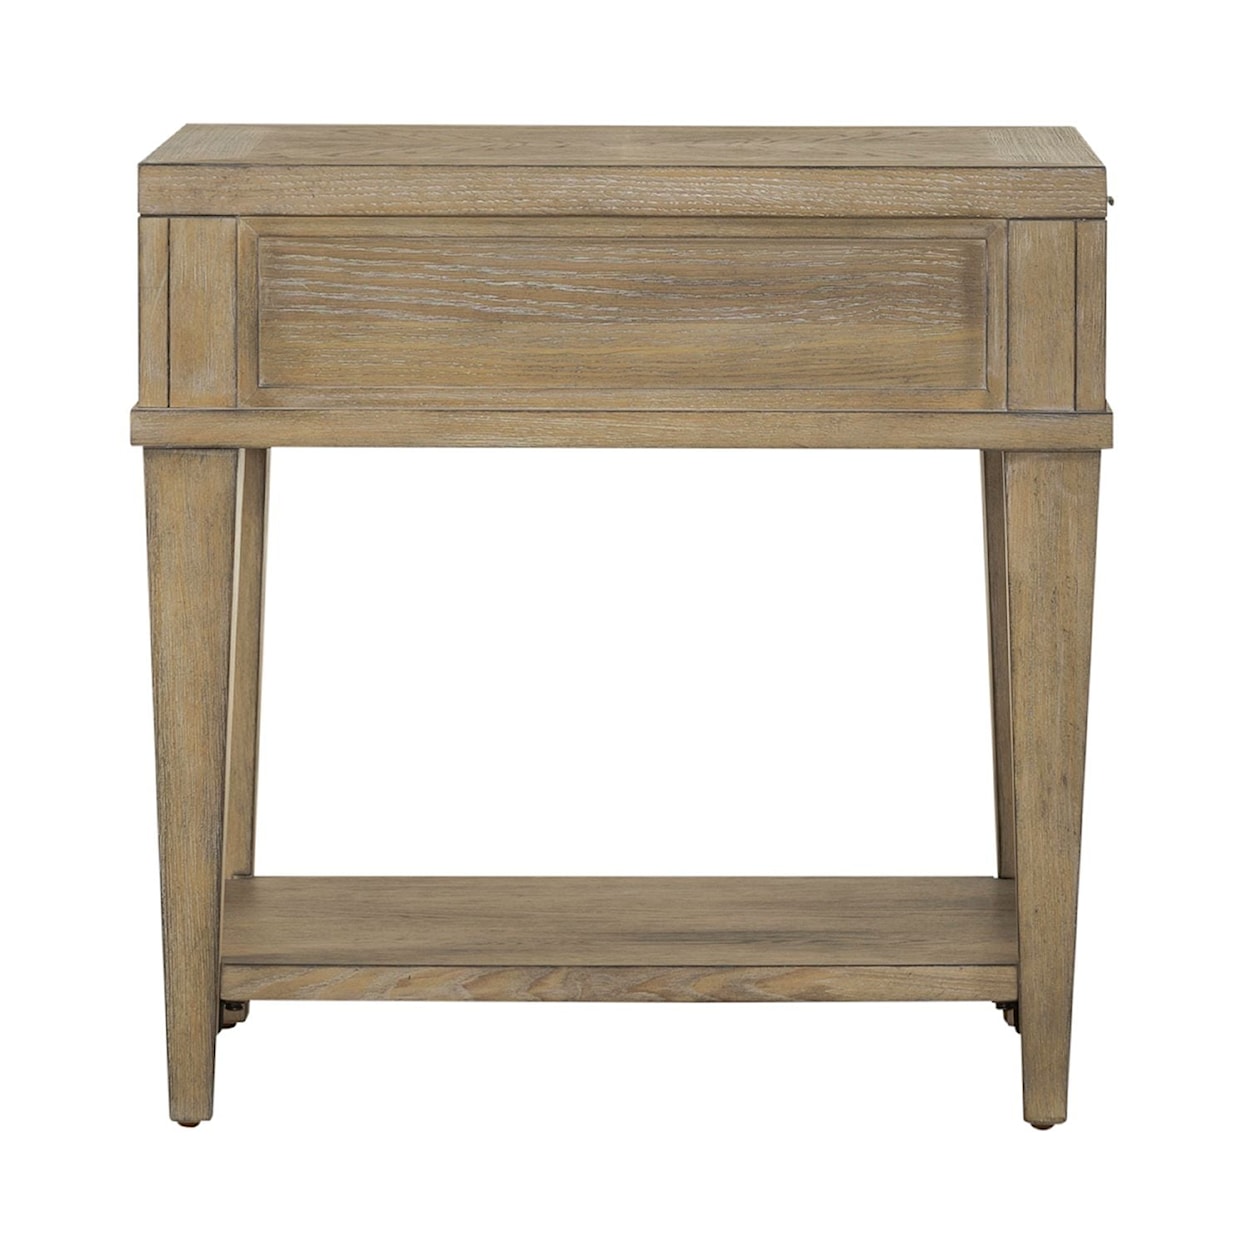 Liberty Furniture Devonshire Chair Side Table